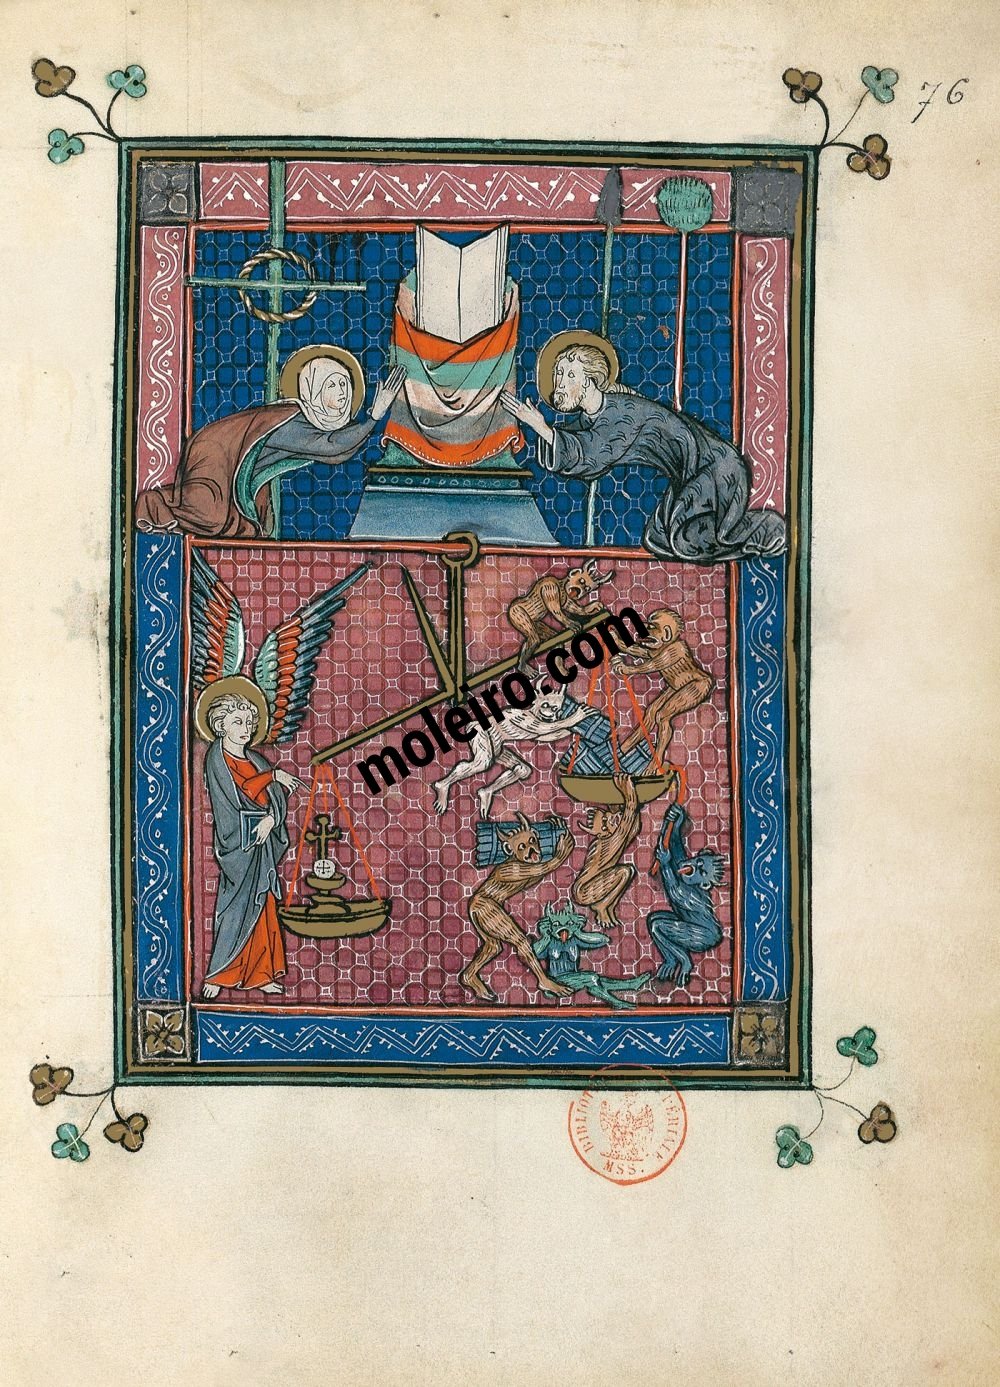 Apocalisse 1313 f. 76r